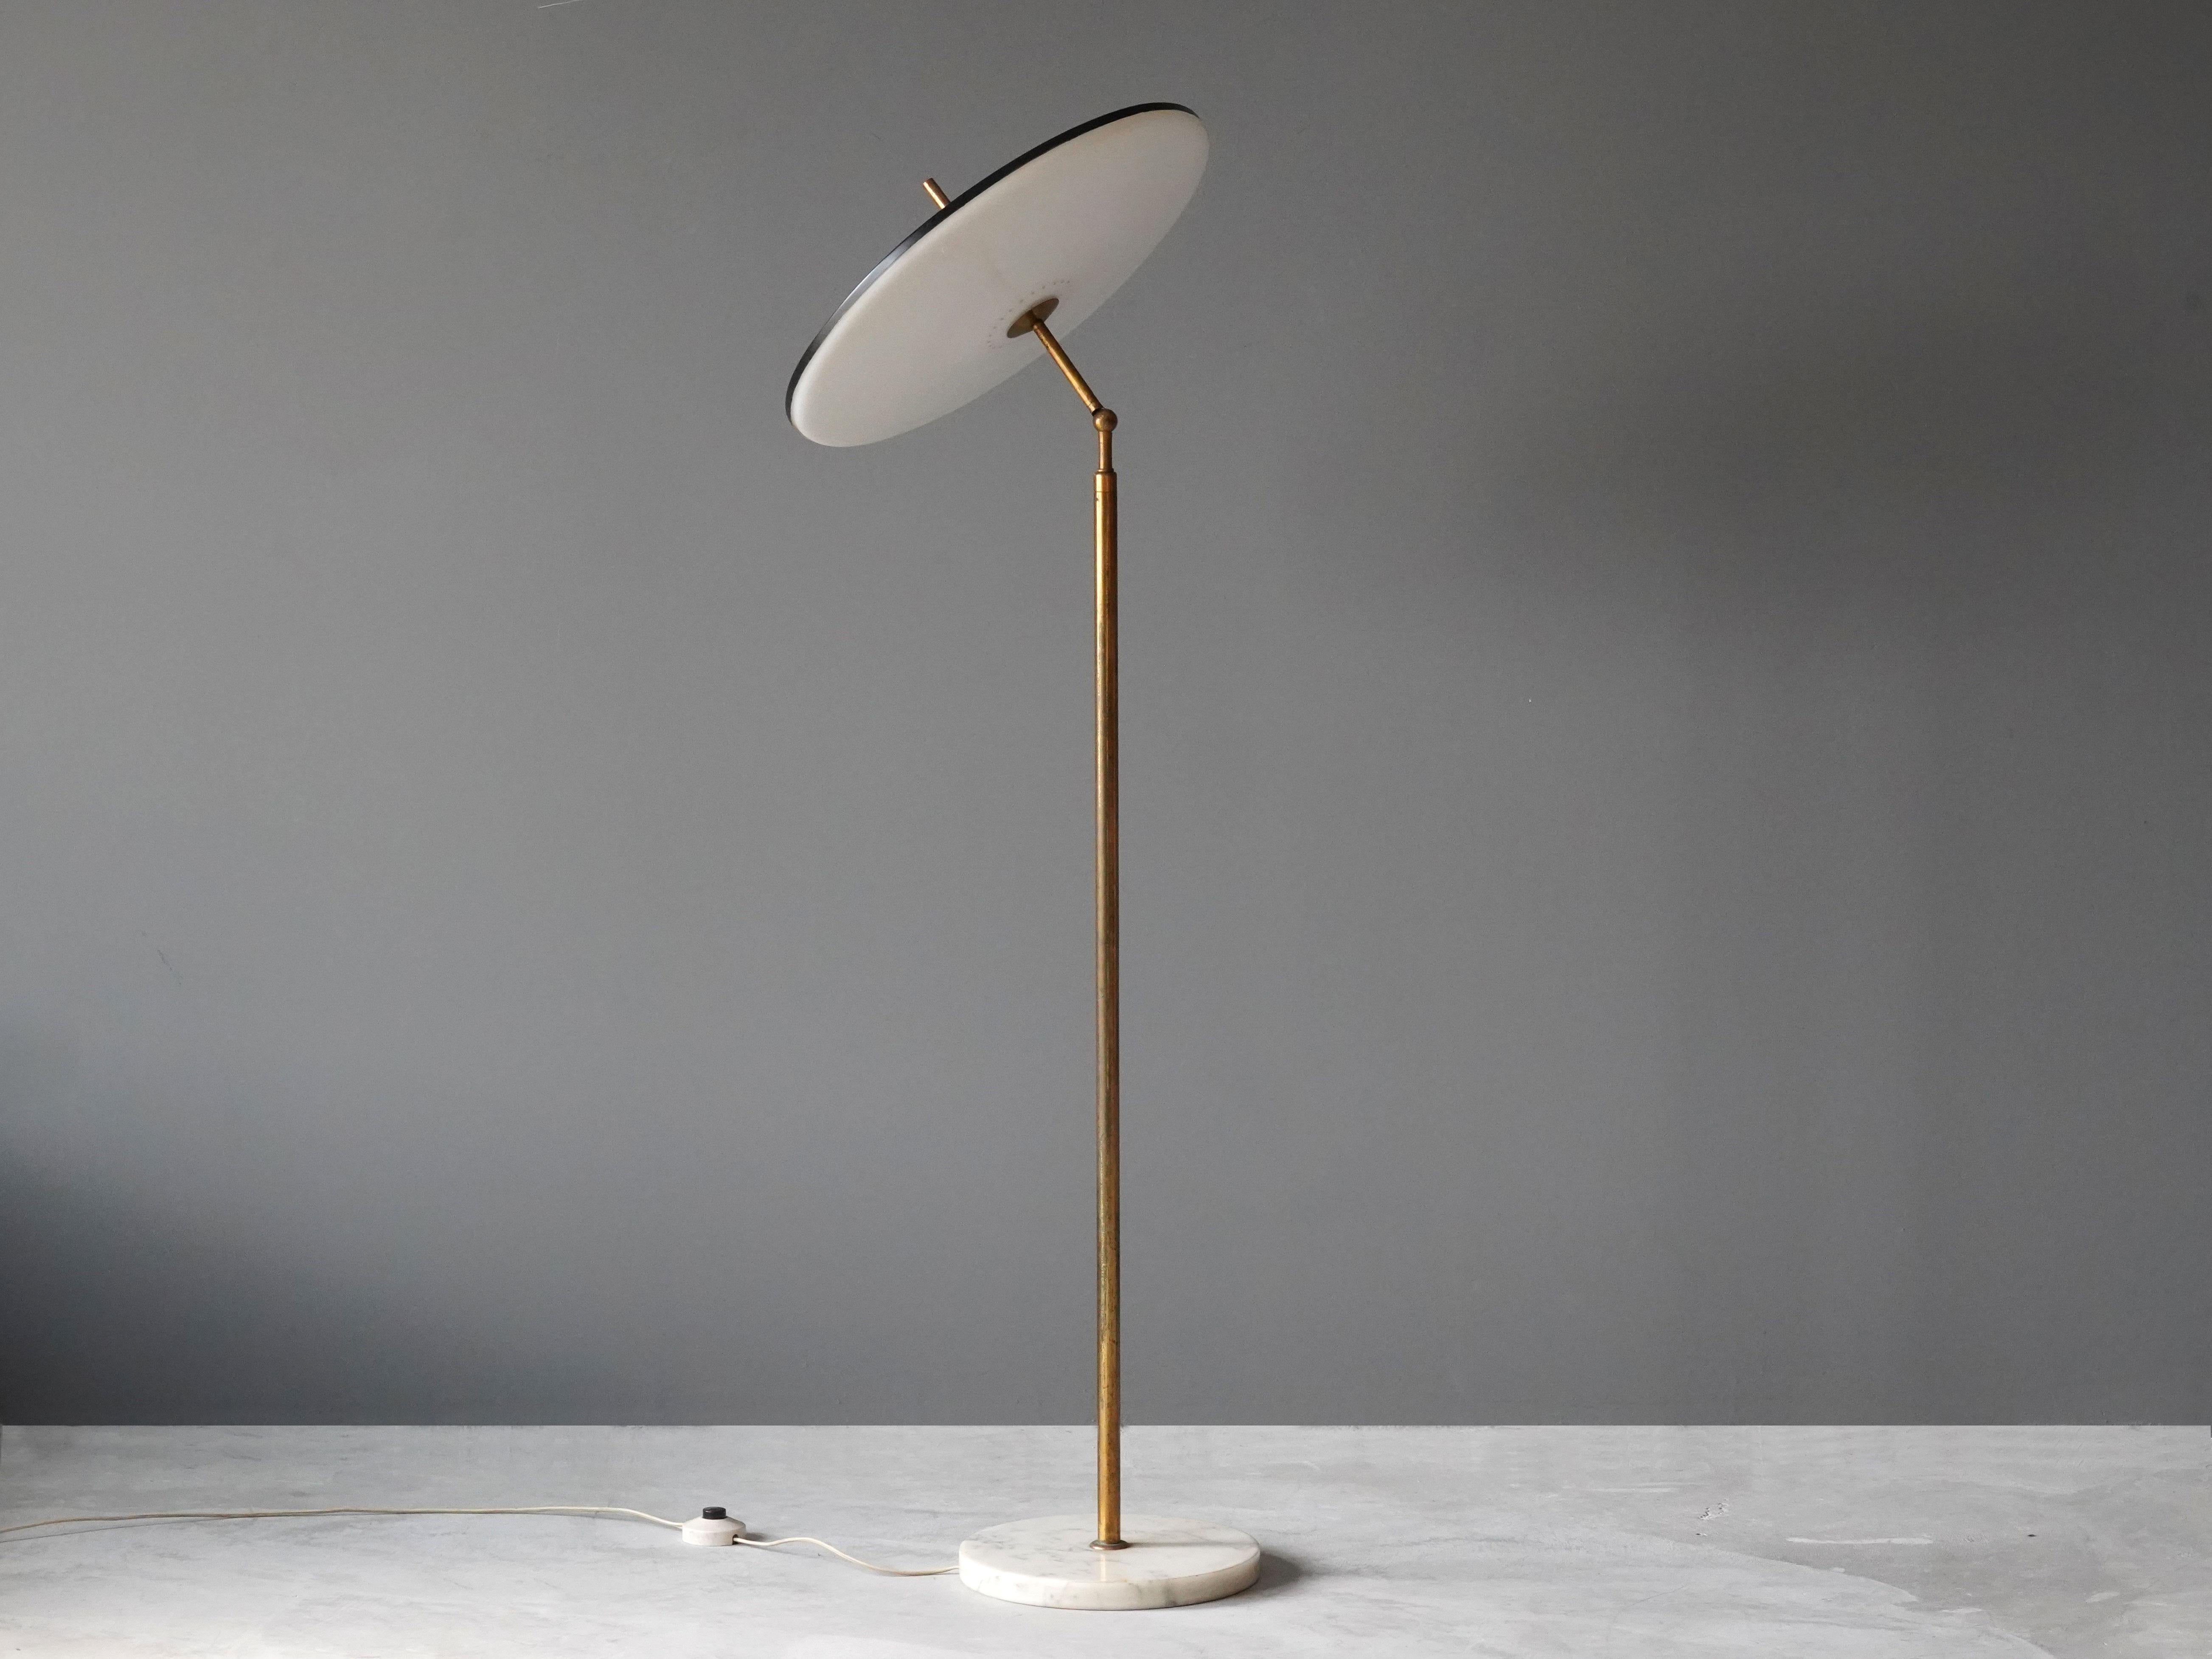 An adjustable modernist floor lamp produced and designed by Lumen Milano. Italy, 1950s. In brass, black-painted metal, acrylic and marble.

Other designers of the era include Max Ingrand, Gino Sarfatti, Angelo Lelii, and Achille Castiglioni.